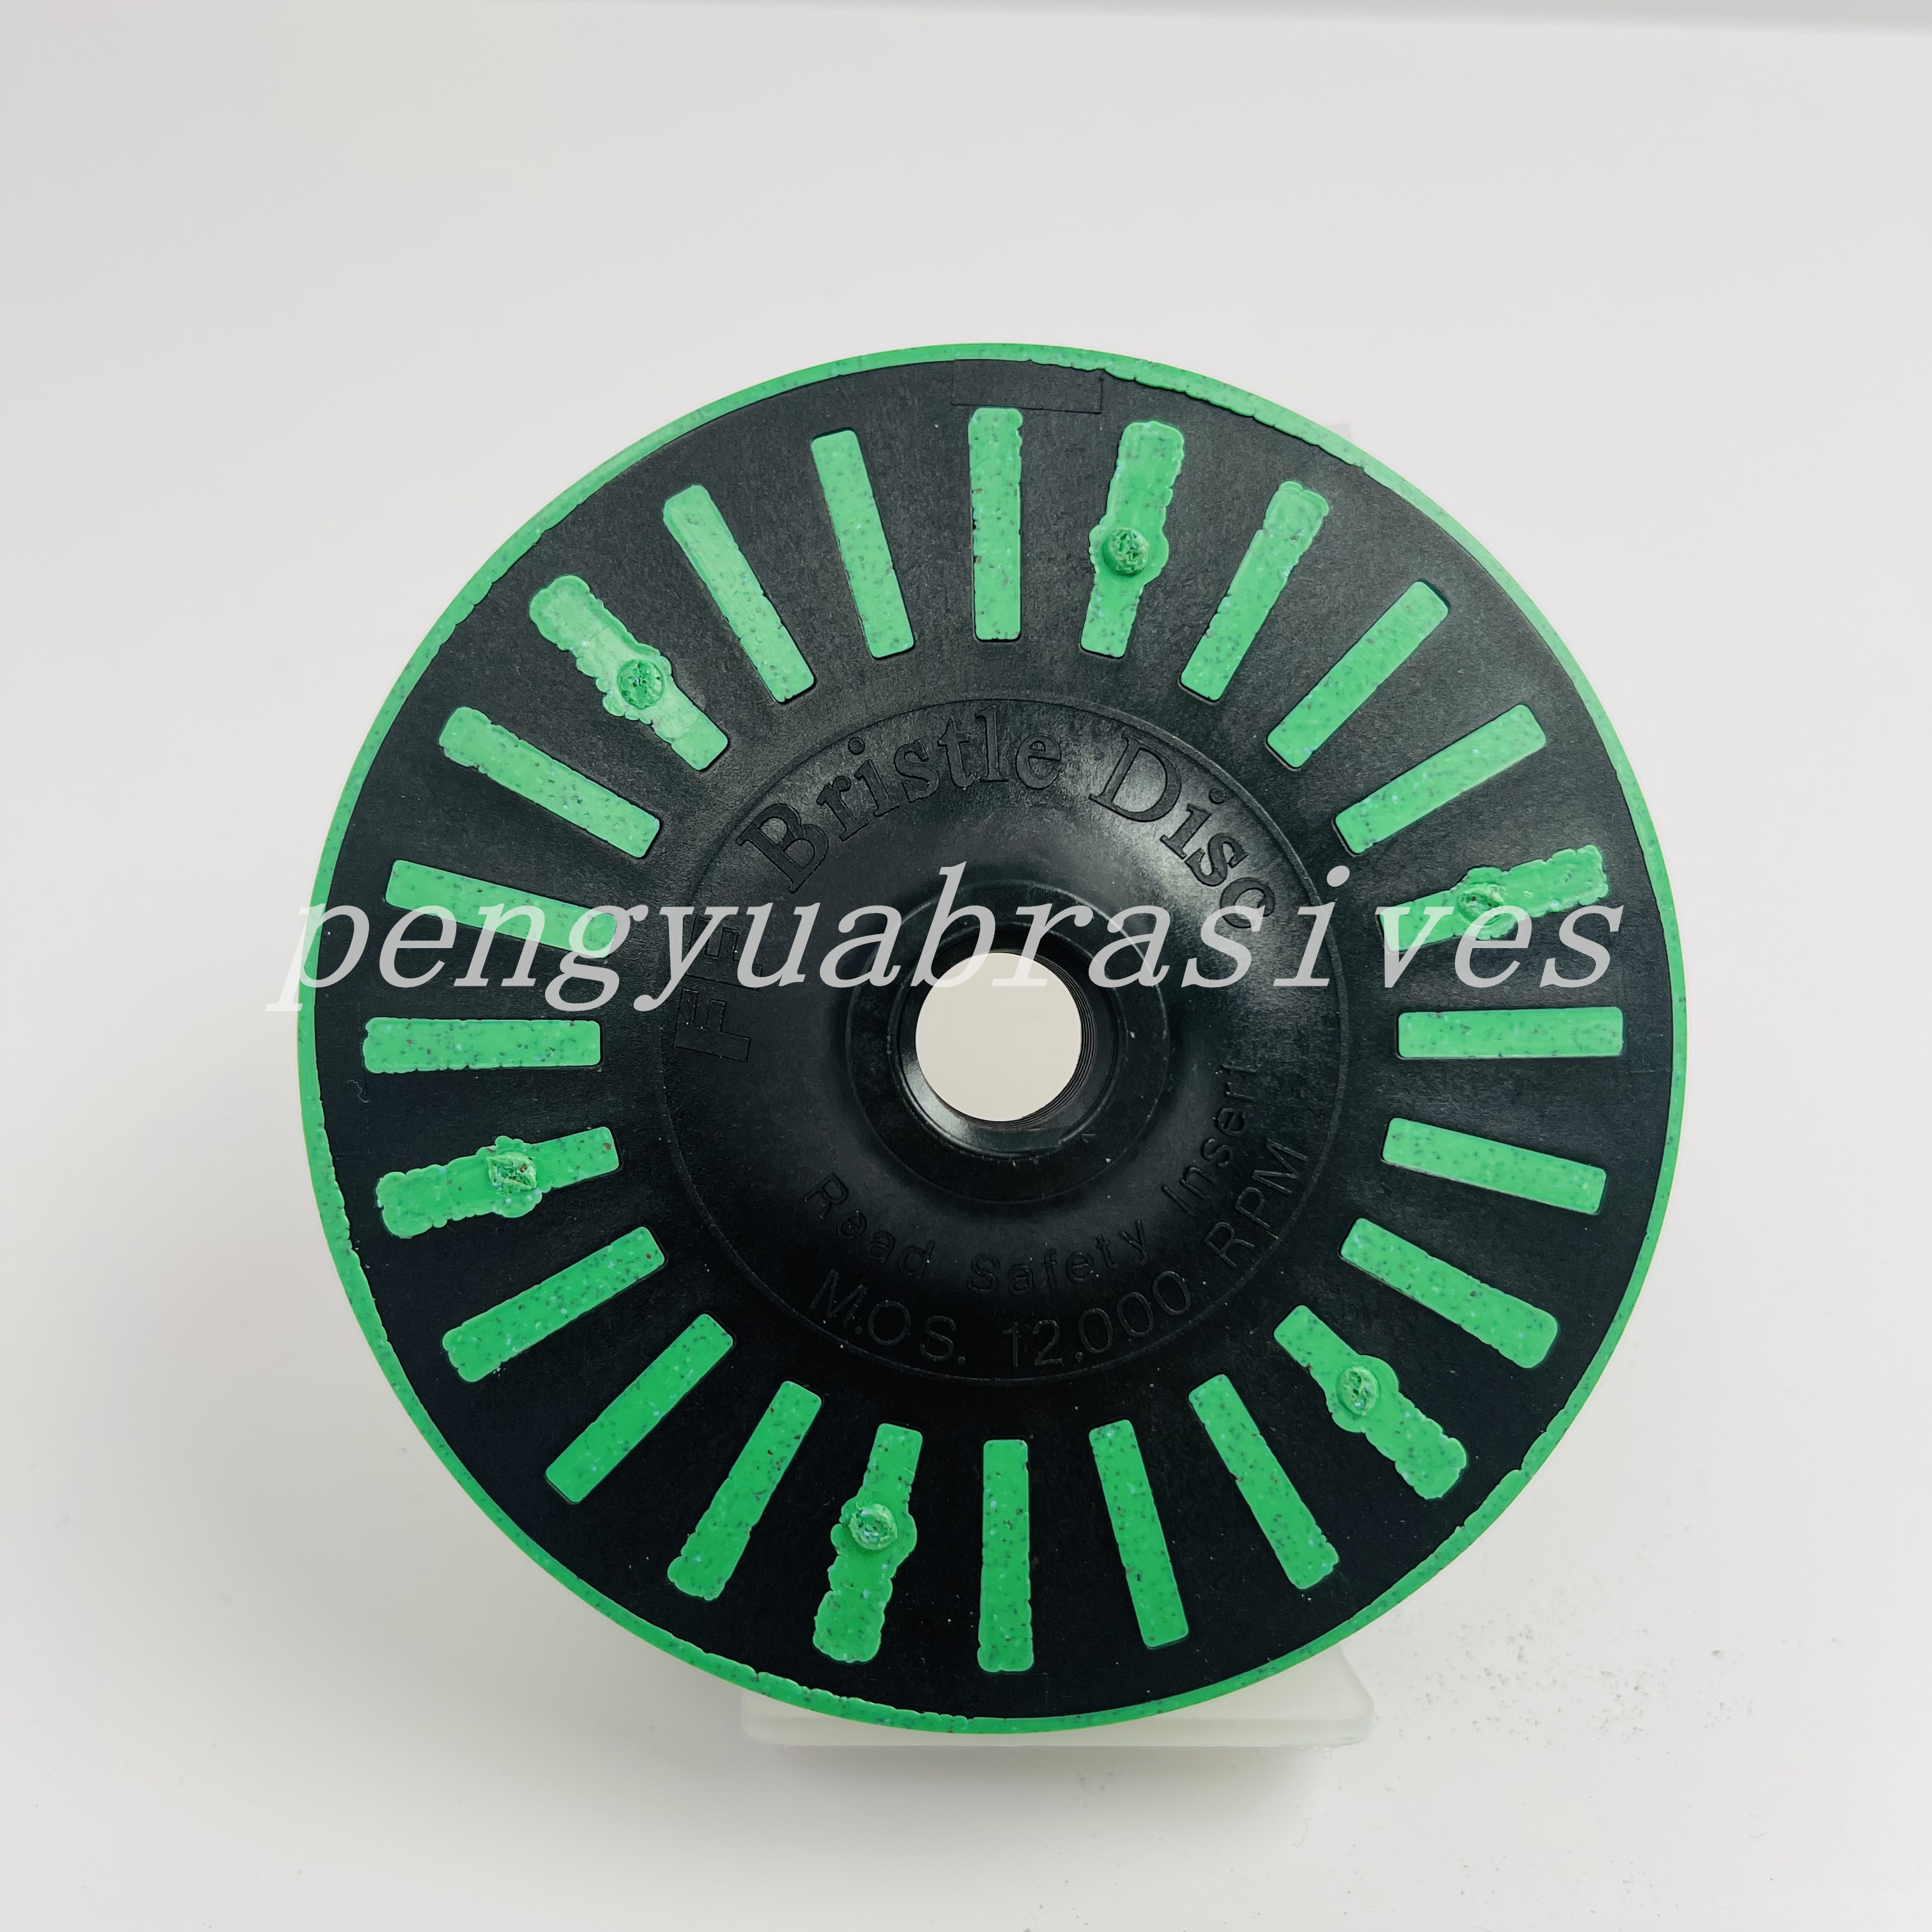 4.5inch Green 50 Grit Plastic Bristle Disc for Welded